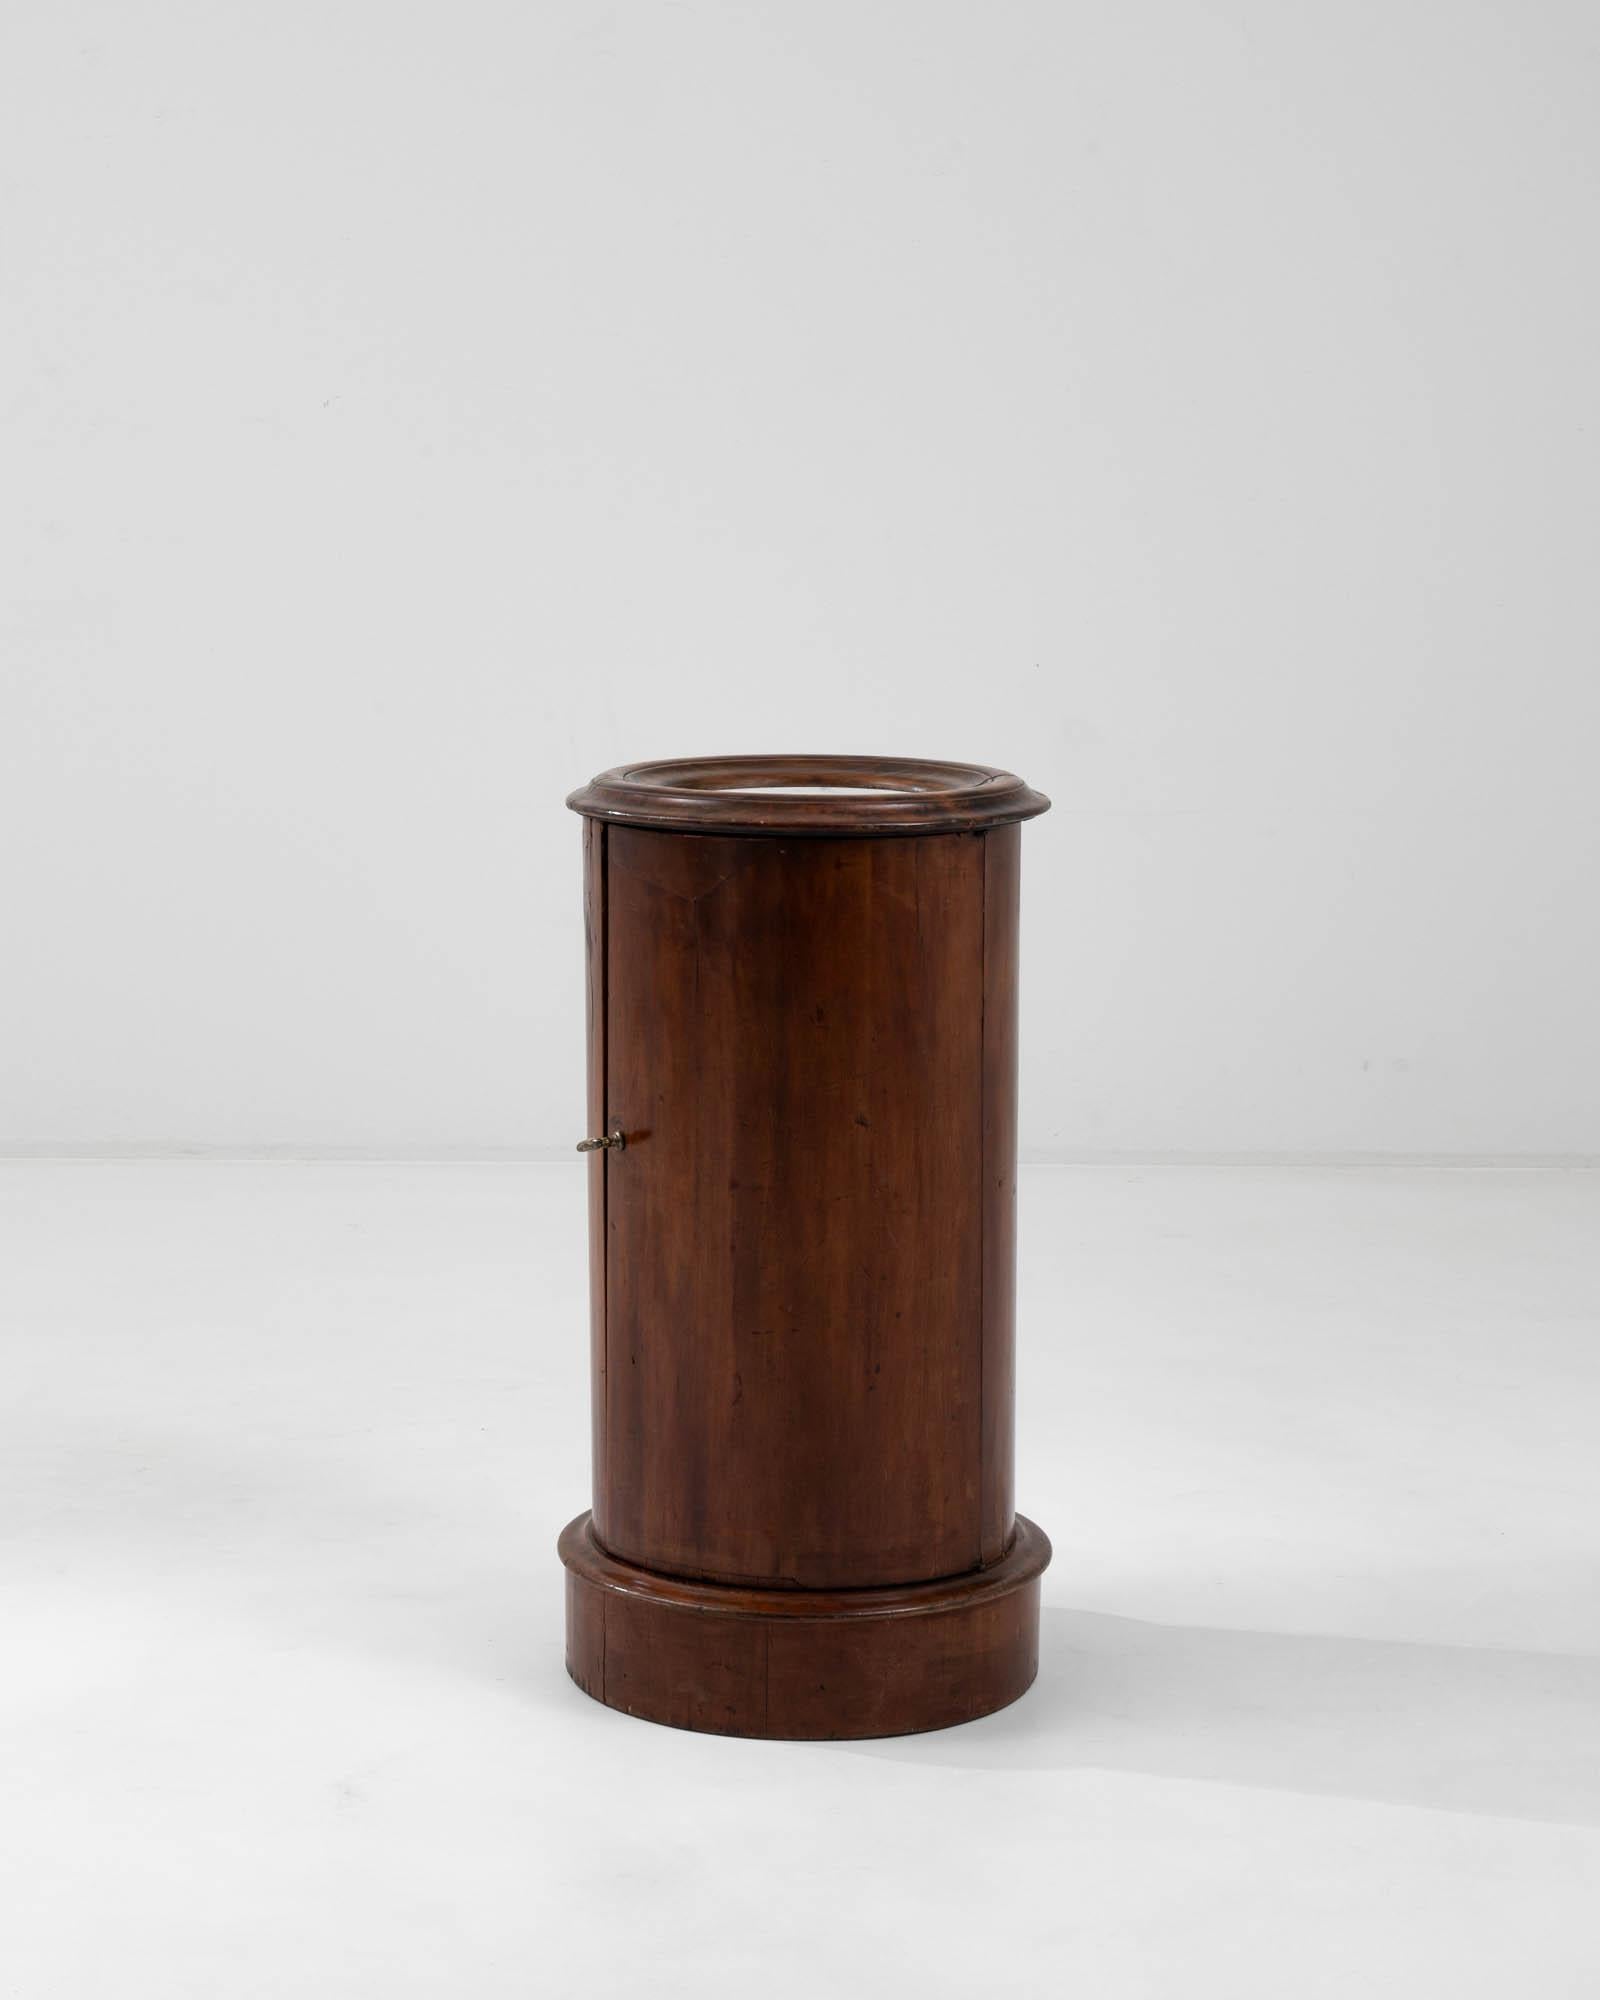 Boasting a sleek cylindrical shape, this elegant cabinet originates from 19th century France. An exquisite inset white marble top provides a striking contrast to the polished dark mahogany wood, skillfully accentuating its fluid contours. With a